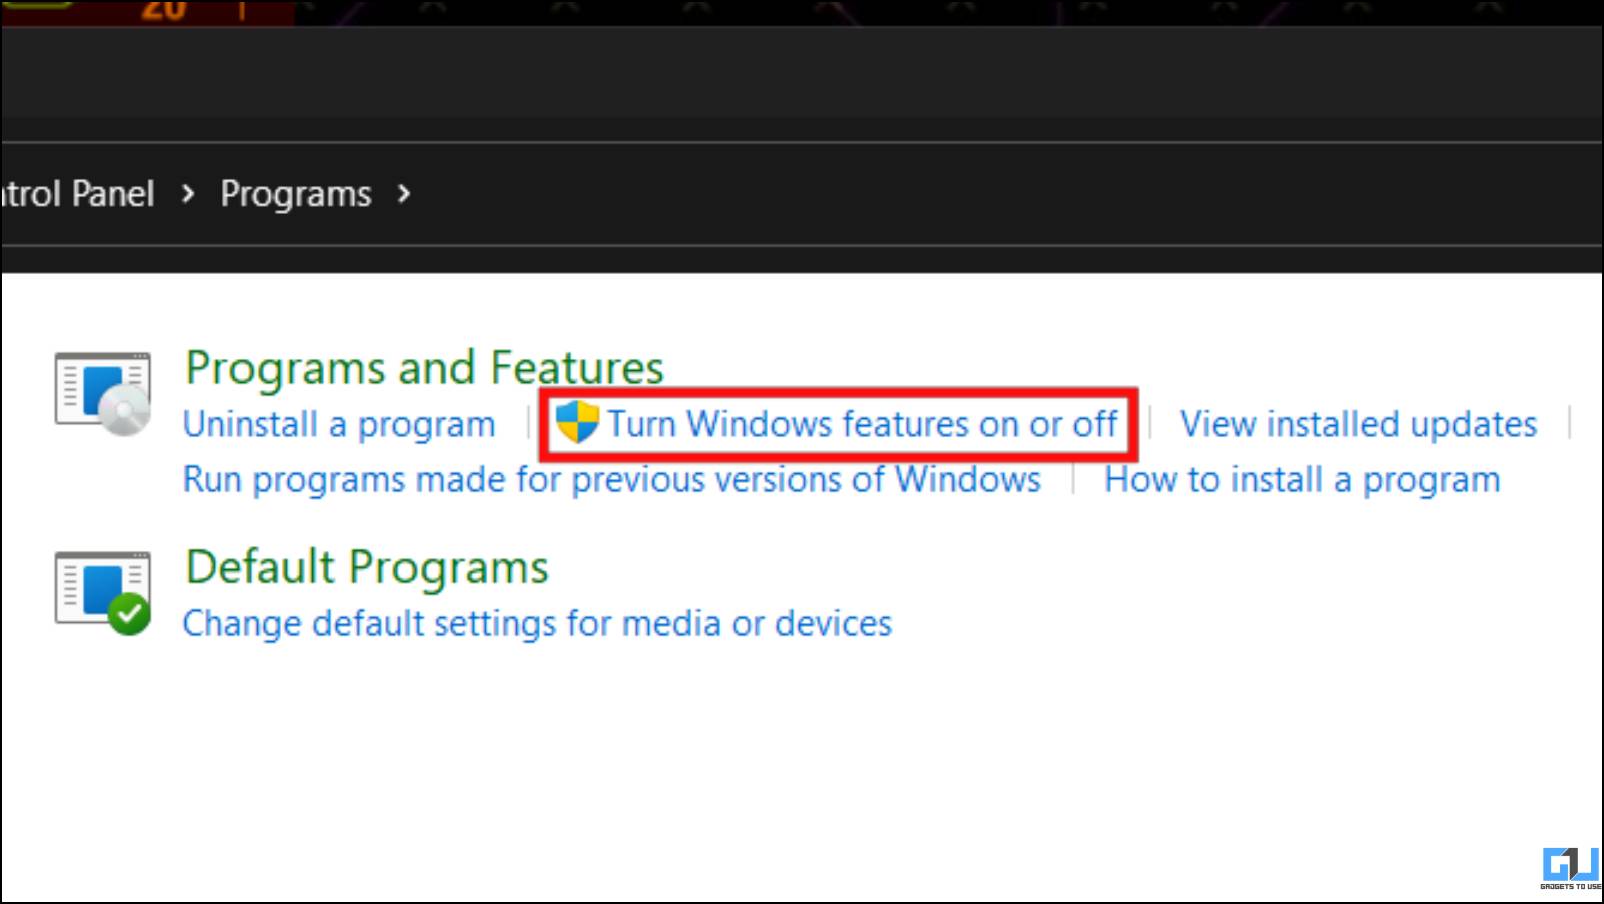 Go to Turn Windows Features On or Off under Programs and Features